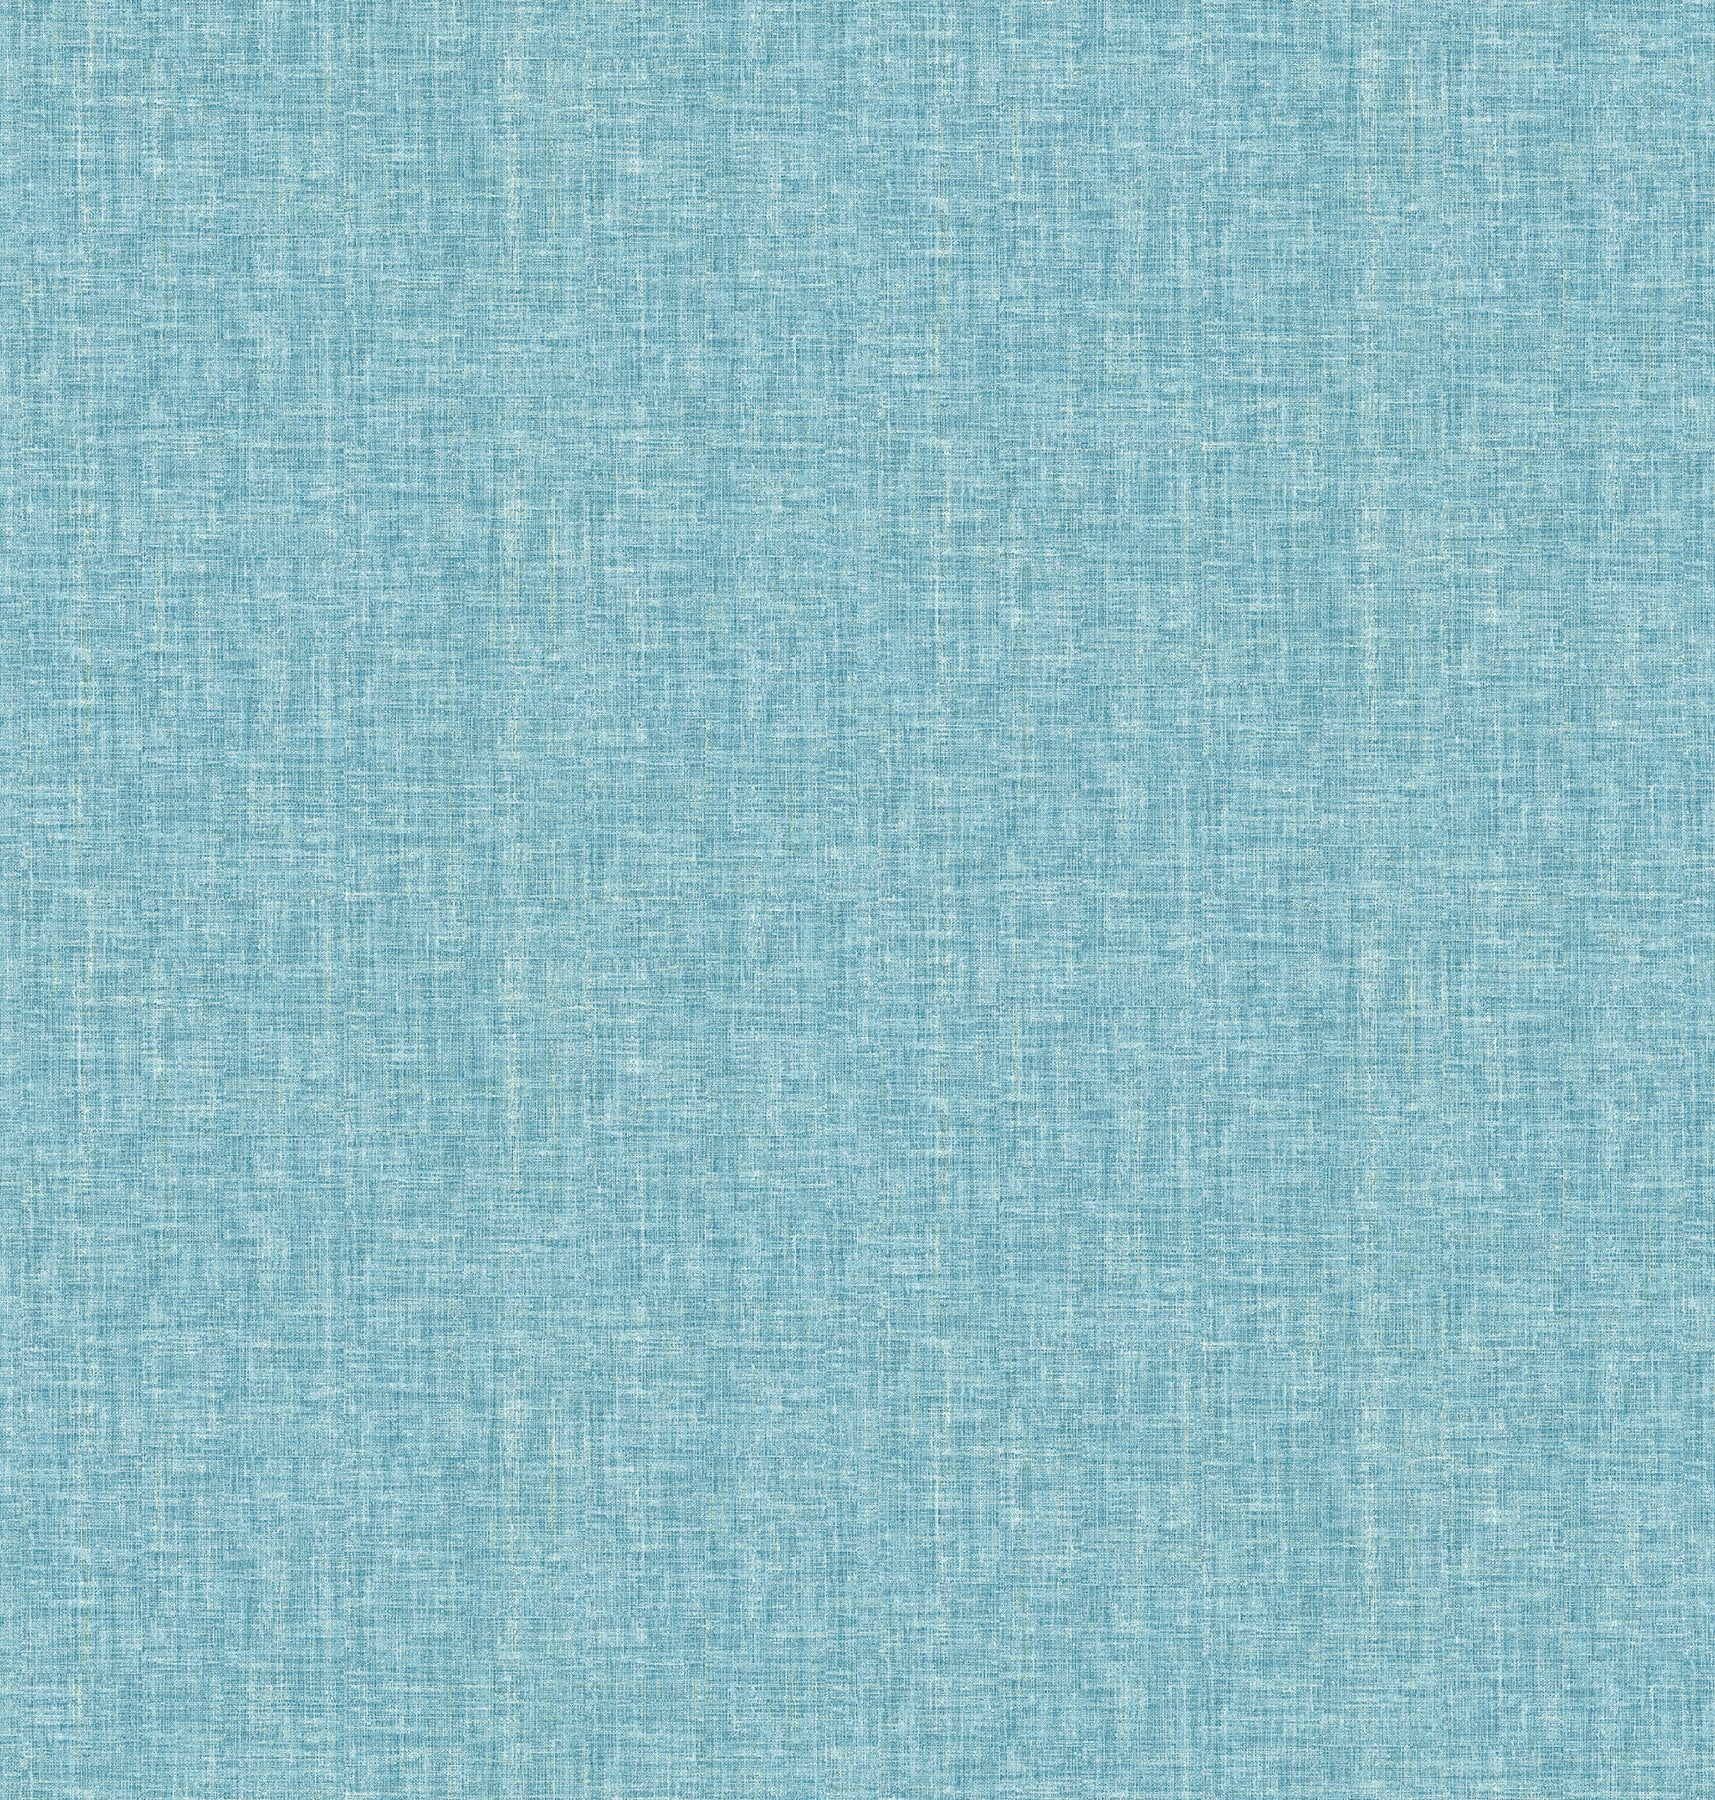 Buy 2702-22754 Oasis Turquoise Linen by A-Street Prints Wallpaper